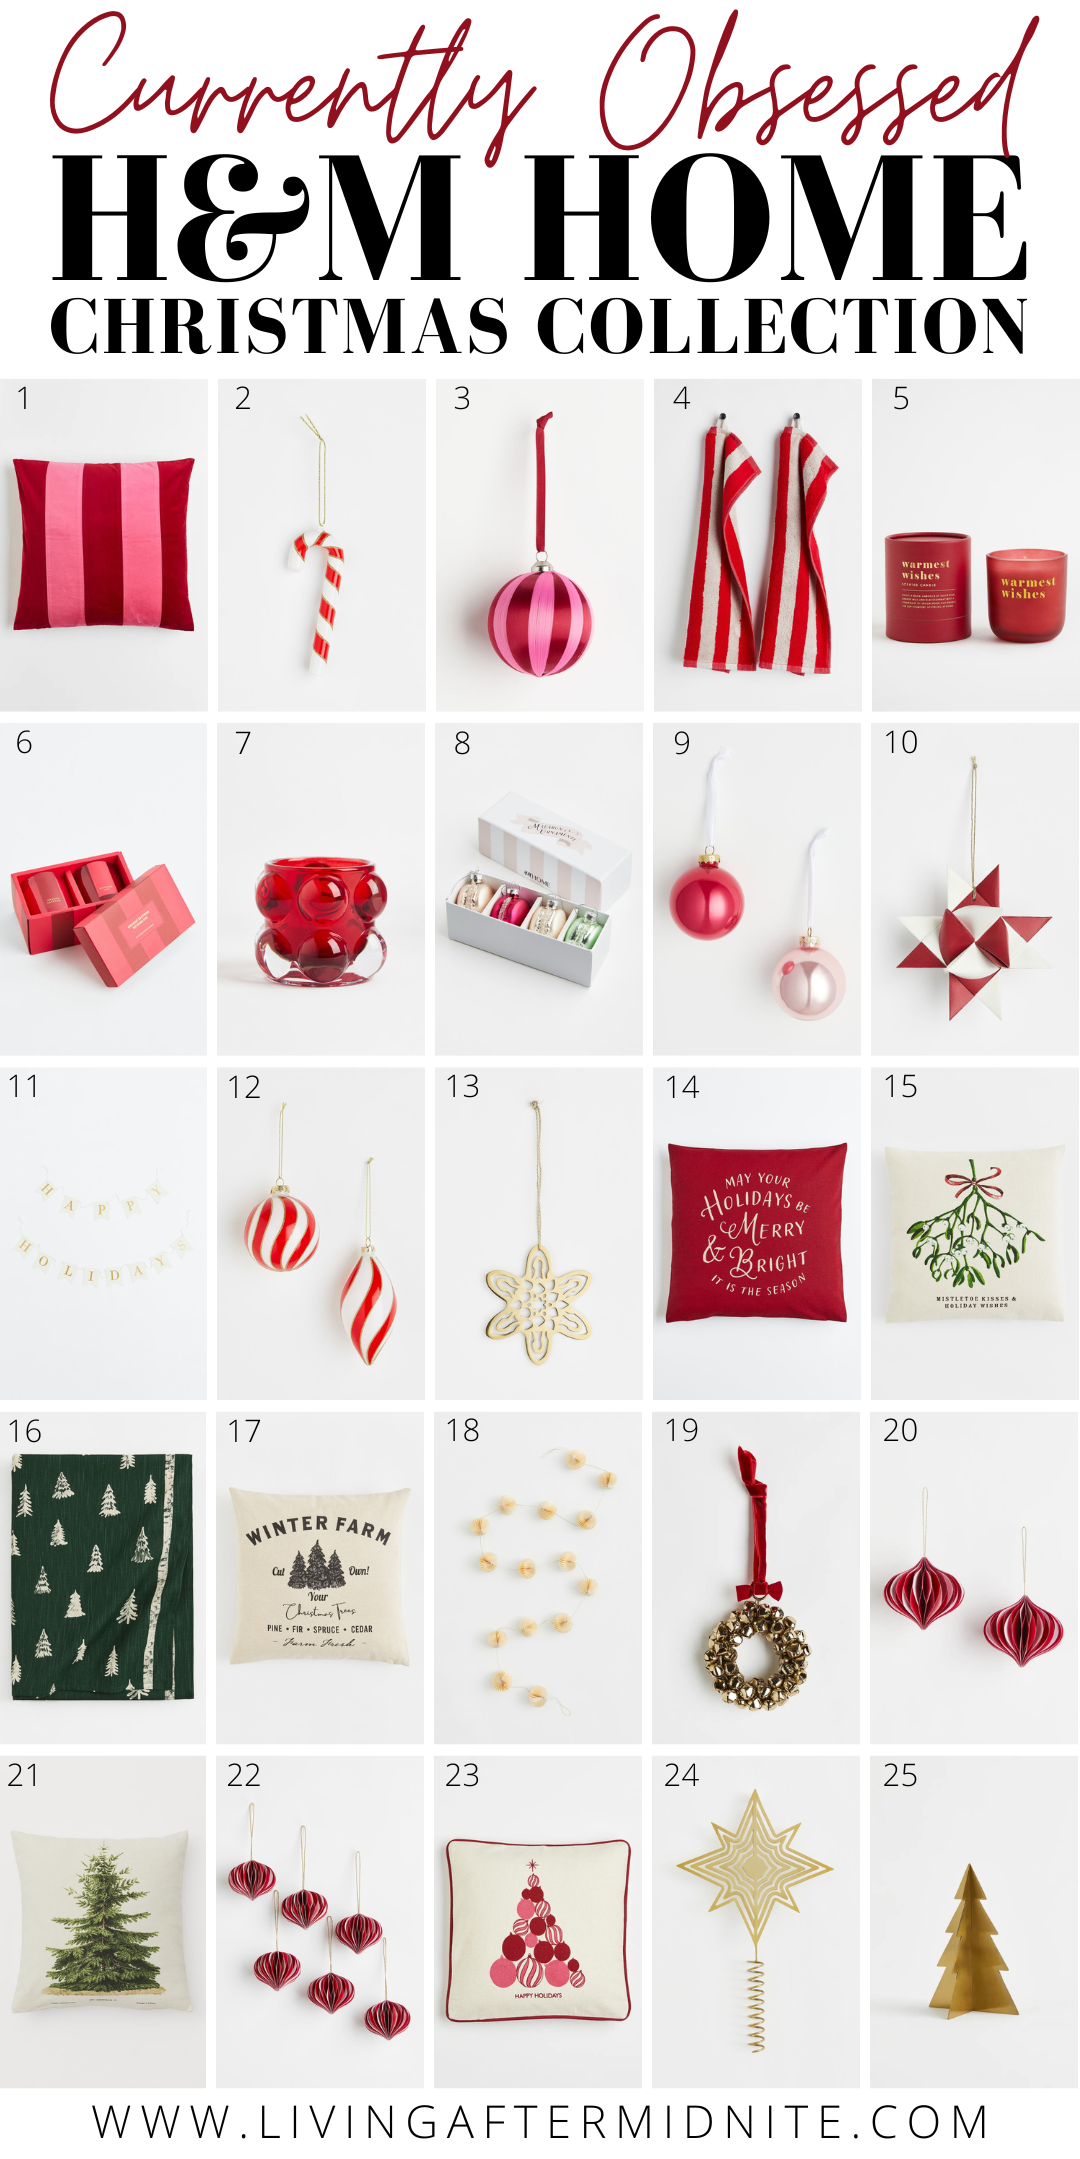 H&M Home Christmas Collection 2022 |H&M Home Christmas Collection | Affordable Holiday Decor | Christmas Tree Decorating | Inexpensive Christmas Decor | Red and Pink Christmas Decor | Living Room Christmas Decorating Ideas | Christmas Aesthetic | Christmas Decor Ideas | Vibrant Christmas Decor